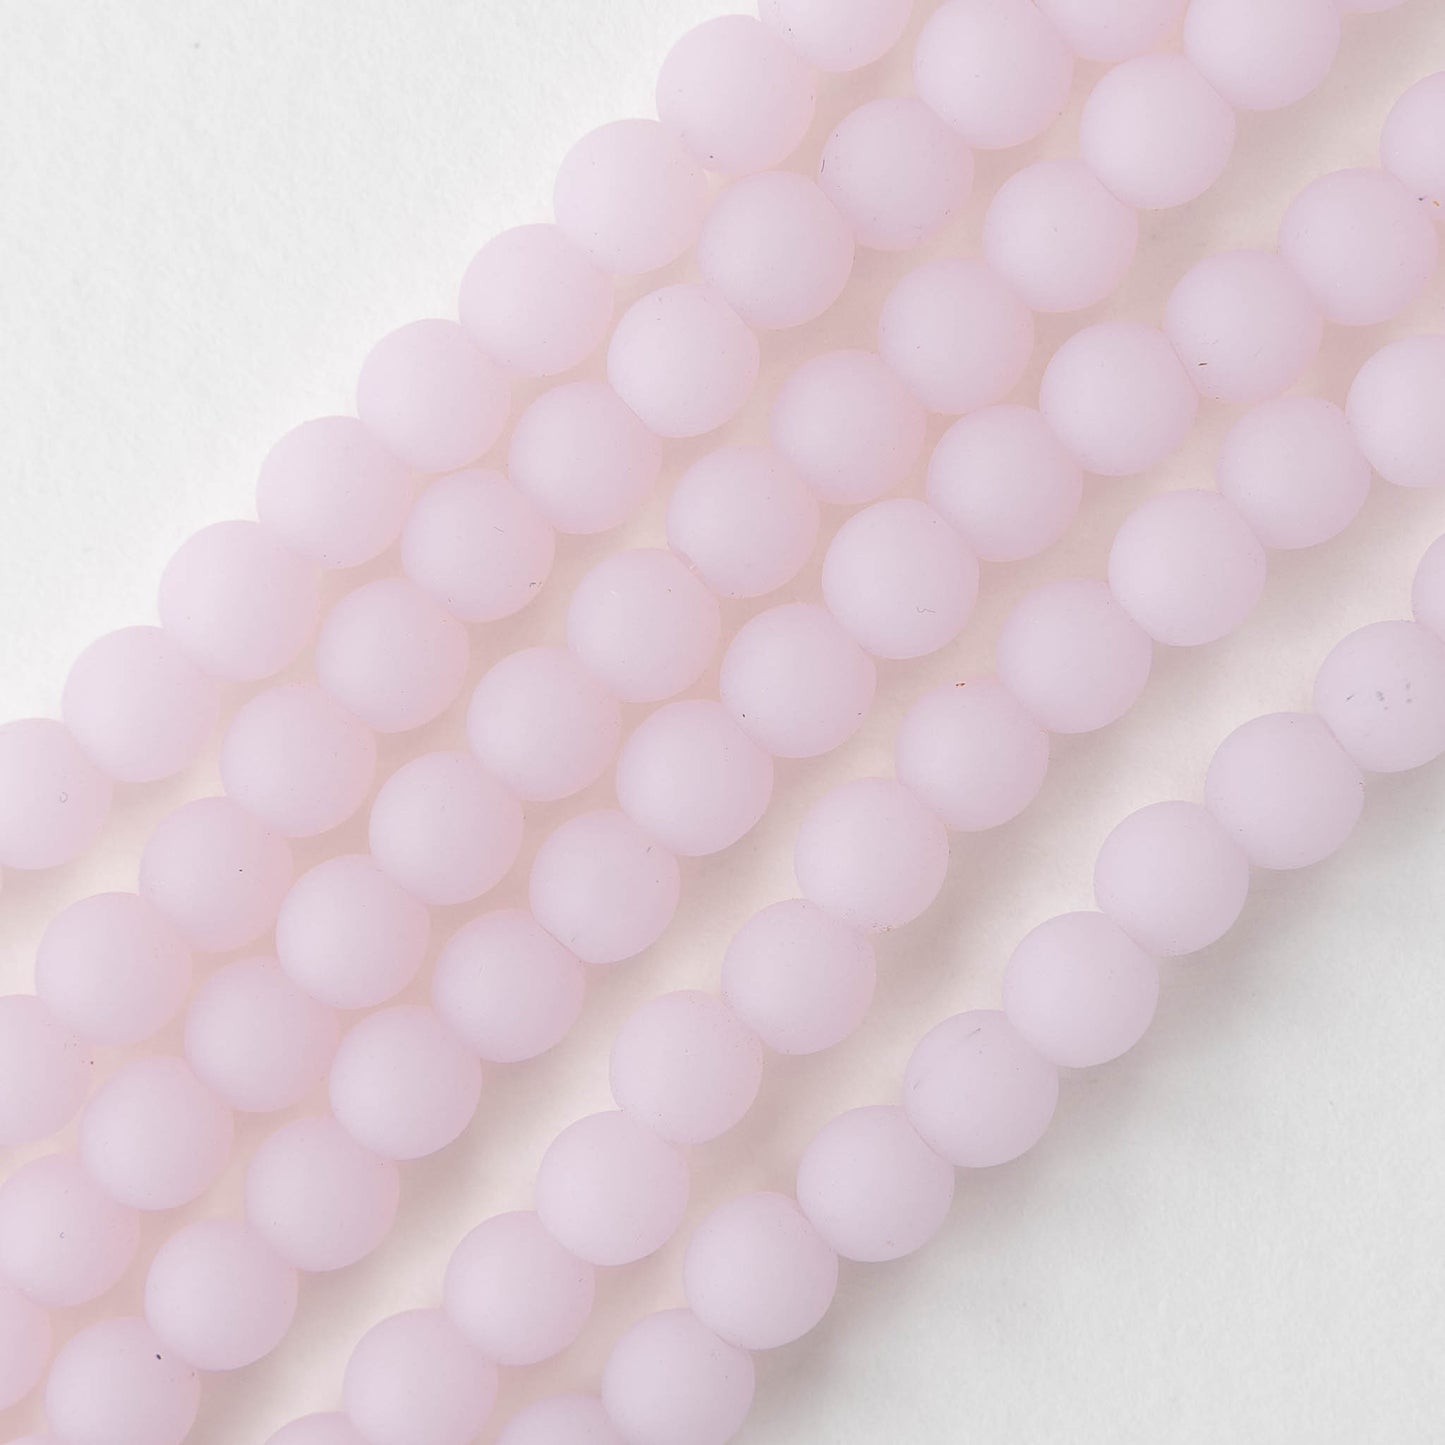 6mm Round Beads - Opaque Pink - 70 beads